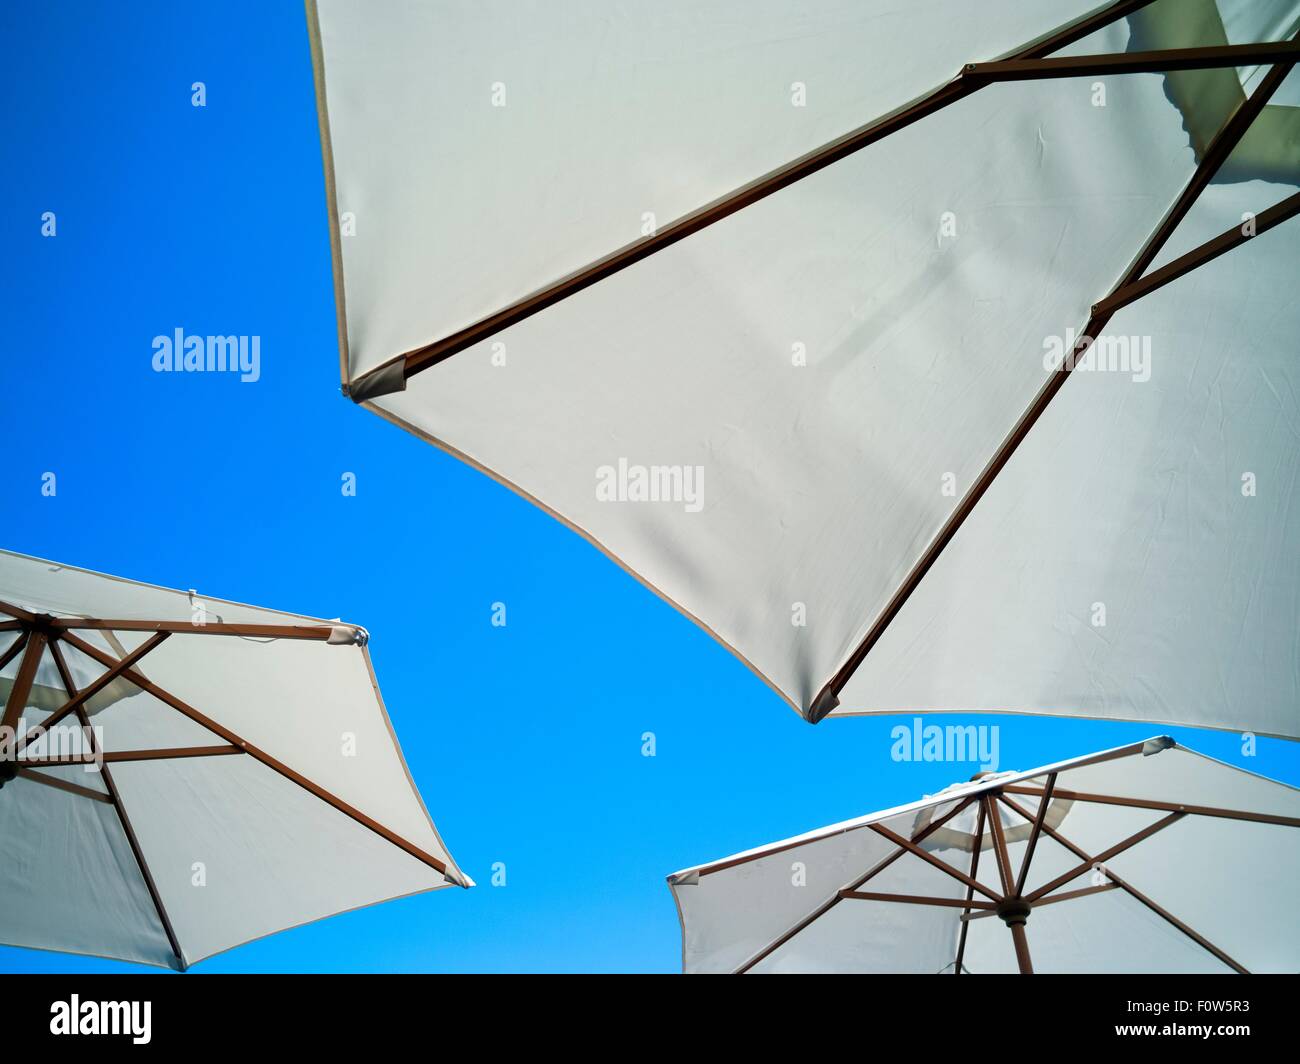 Low angle view of parasols and blue sky Stock Photo